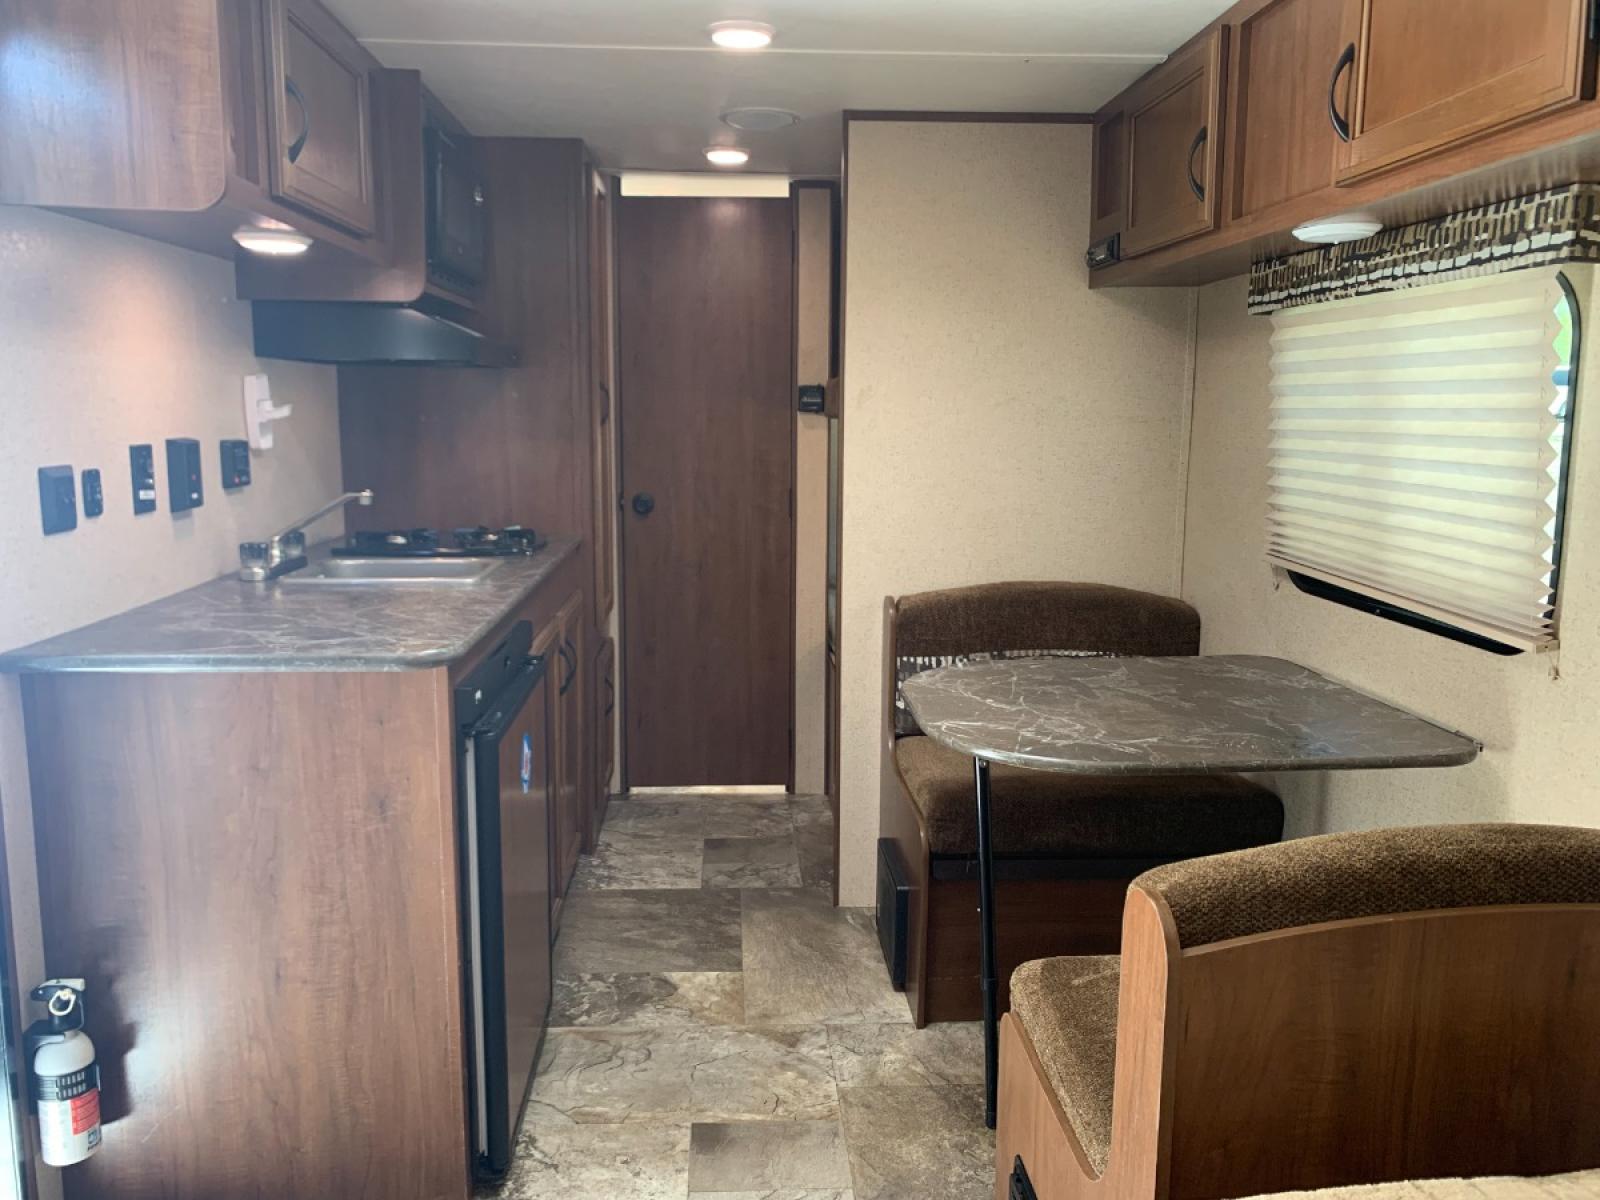 2016 TAN JAYCO Unknown 174BH (1UJBJ0AJ9G1) , located at 17760 Hwy 62, Morris, OK, 74445, 35.609104, -95.877060 - 2016 JAYCO JAY FLIGHT SLX 174BH IS 21.5FT LONG. THE OUTSIDE FEATURES A 10FT POWER AWNING, OUTSIDE STORAGE, OUTSIDE SPEAKERS, SINGLE AXLE, REAR MANUAL LEVELING JACKS, AND SPARE TIRE. AS YOU ENTER THE CAMPER, YOU WILL NOTICE THAT THERE ARE 5 WINDOWS SO YOU CAN LET NATURAL SUNLIGHT IN, THE QUEEN BE - Photo #21